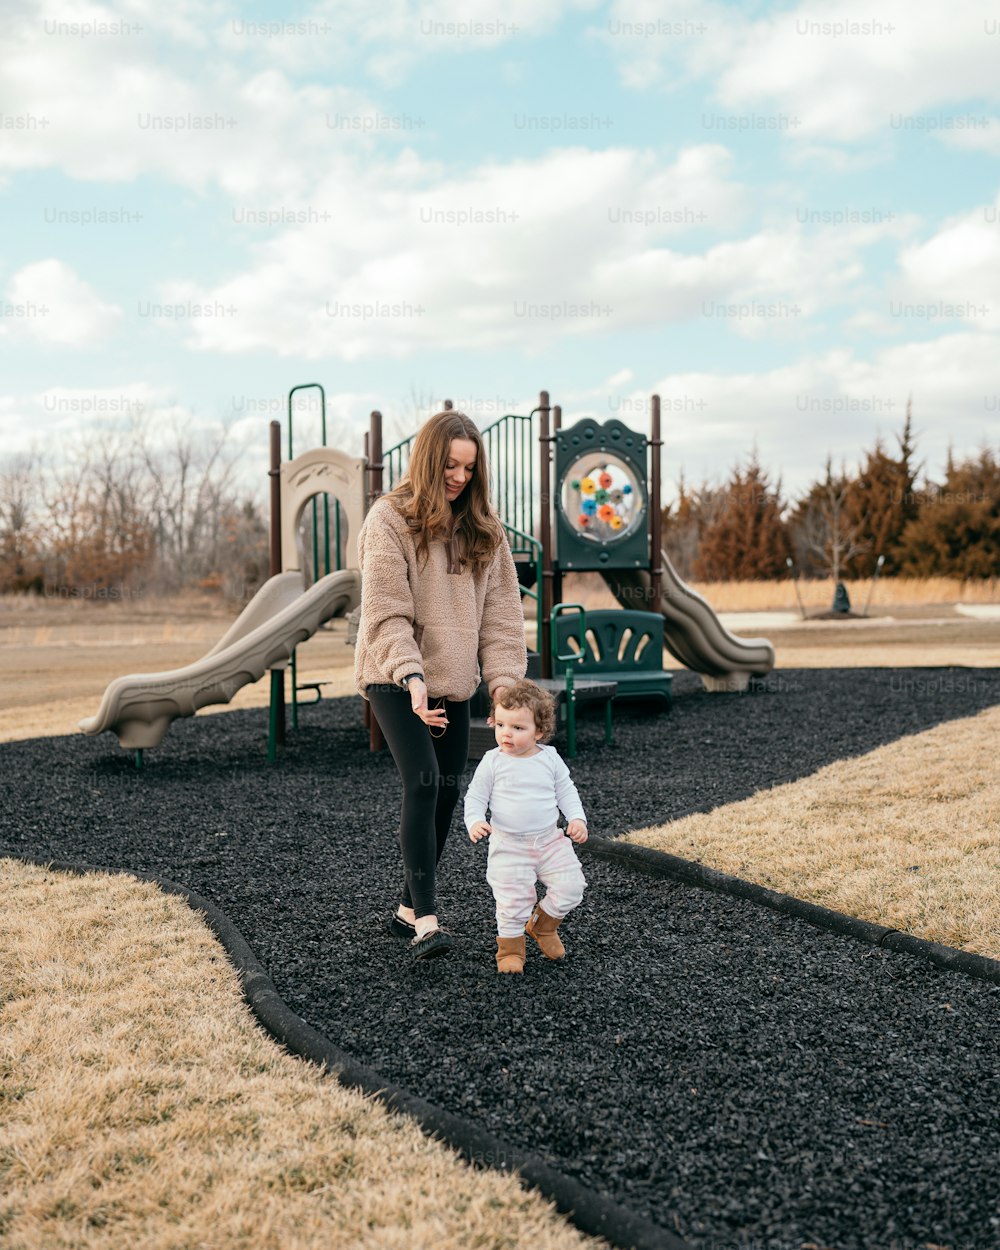 a woman and a baby standing in front of a playground